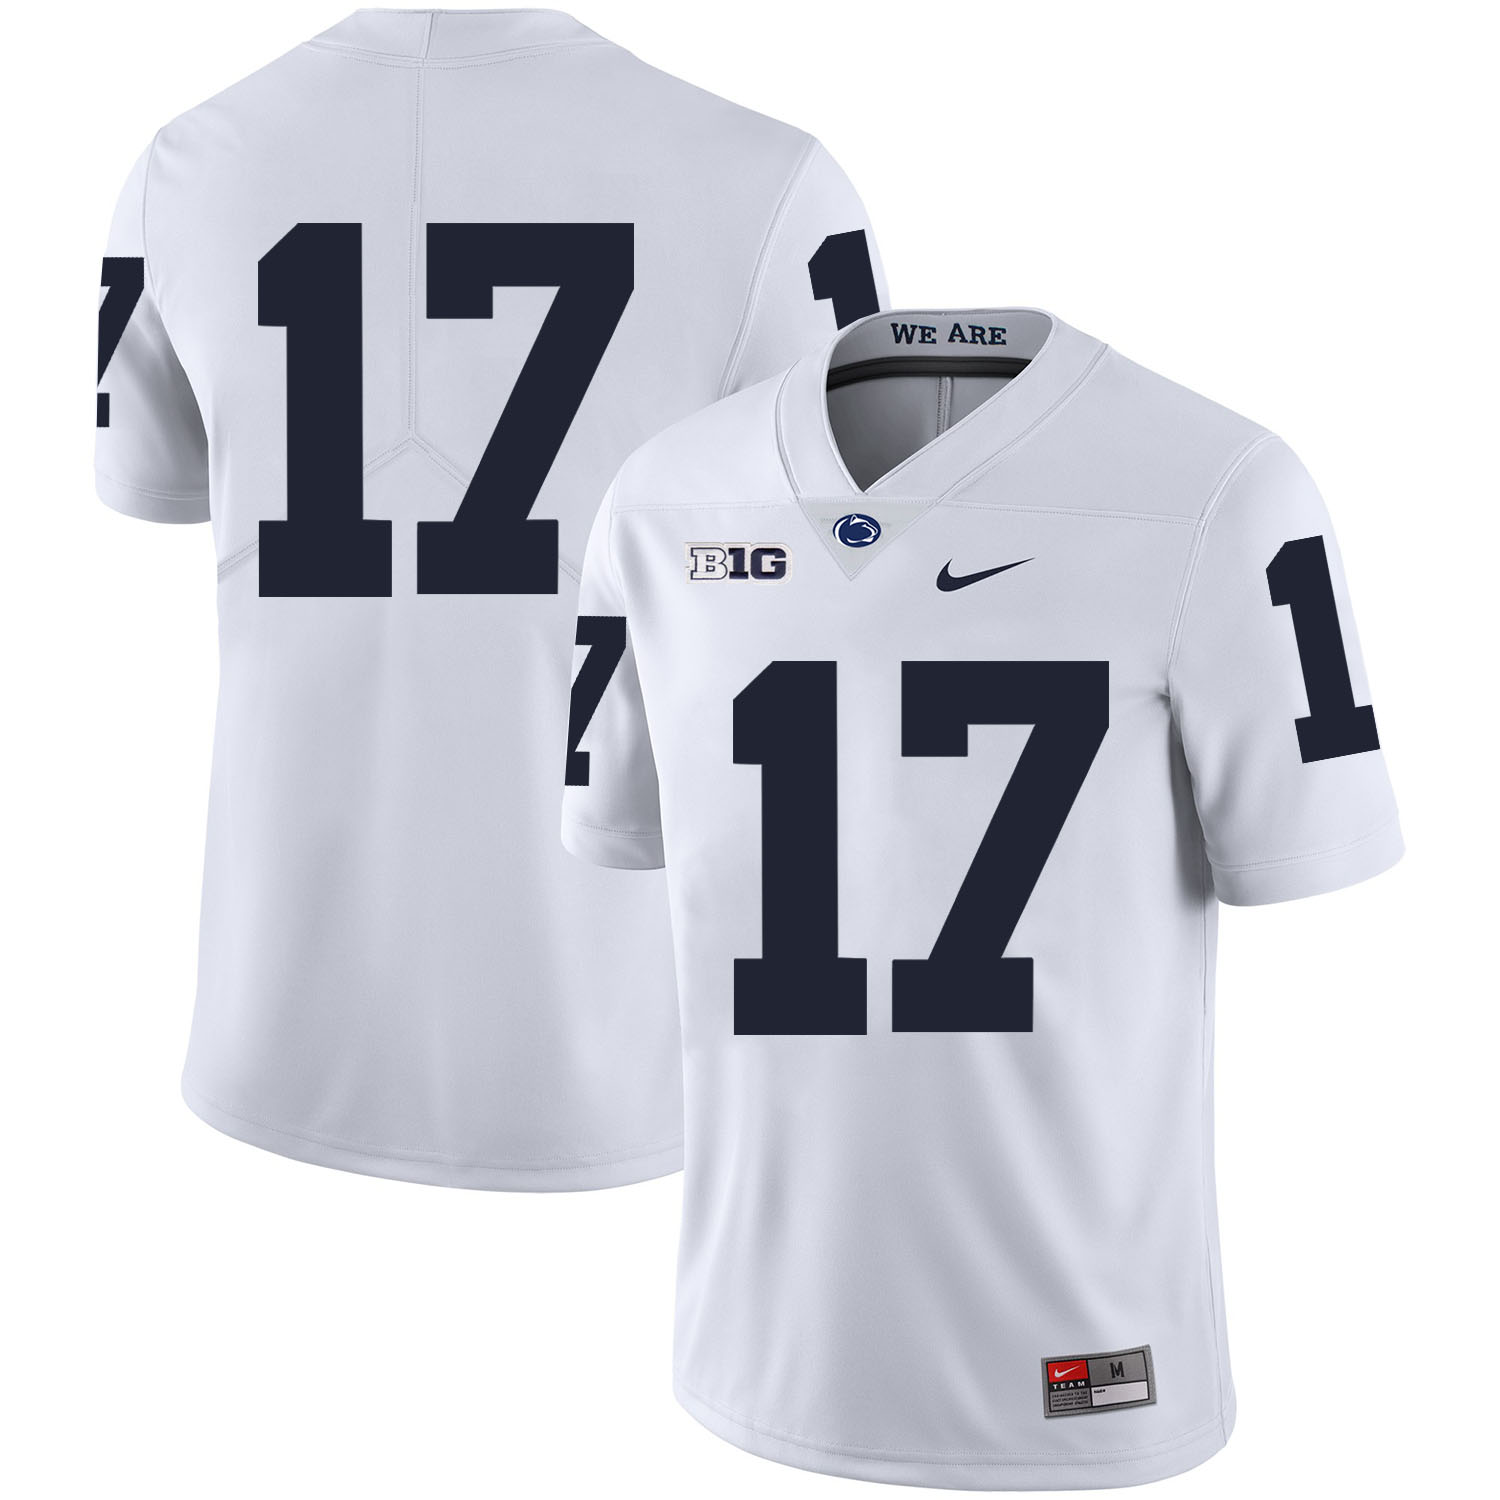 Penn State Nittany Lions 17 Generations Of Greatness White Nike College Football Jersey